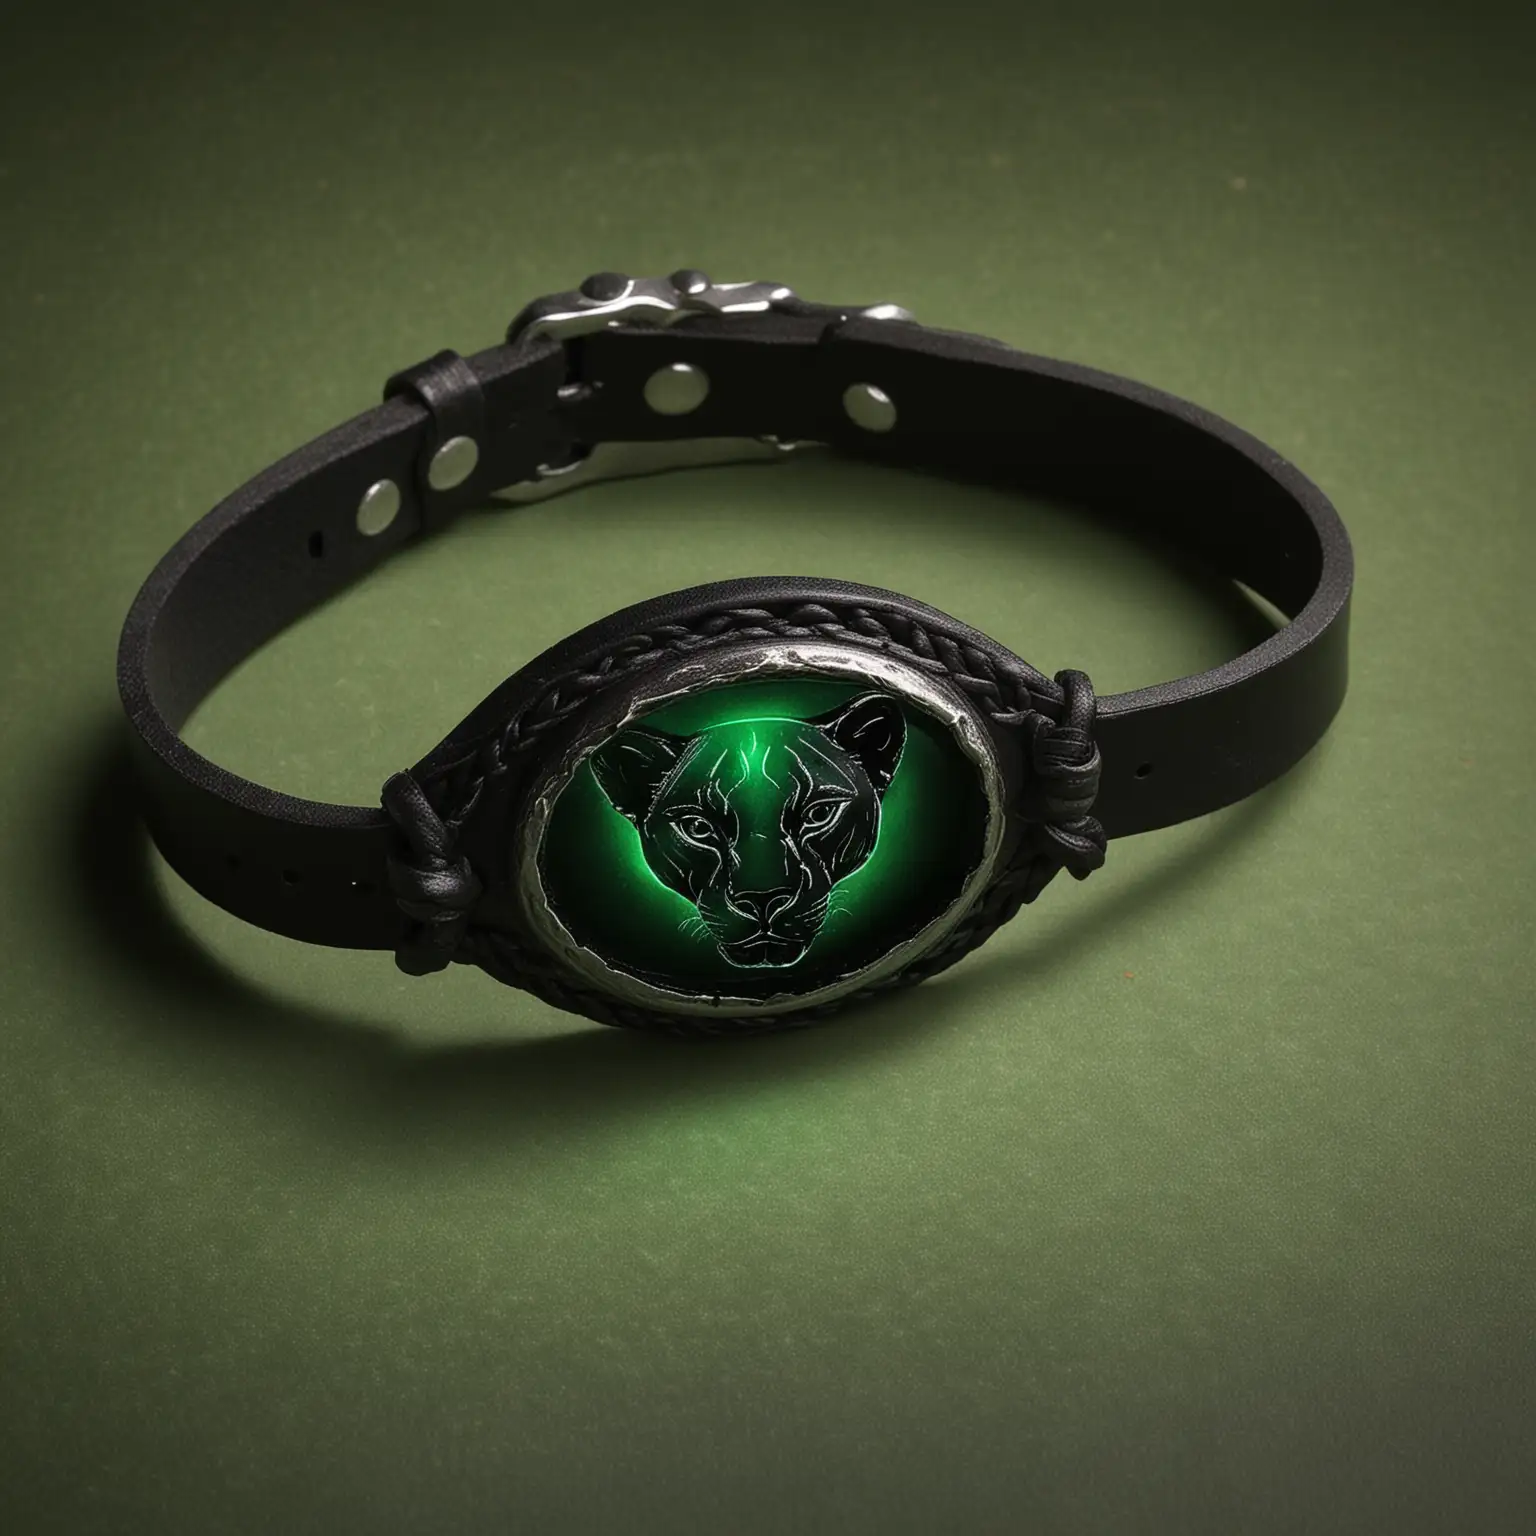 Black Leather Wristband with Panther Face Oval Stone Stylish Accessory with Green Glow